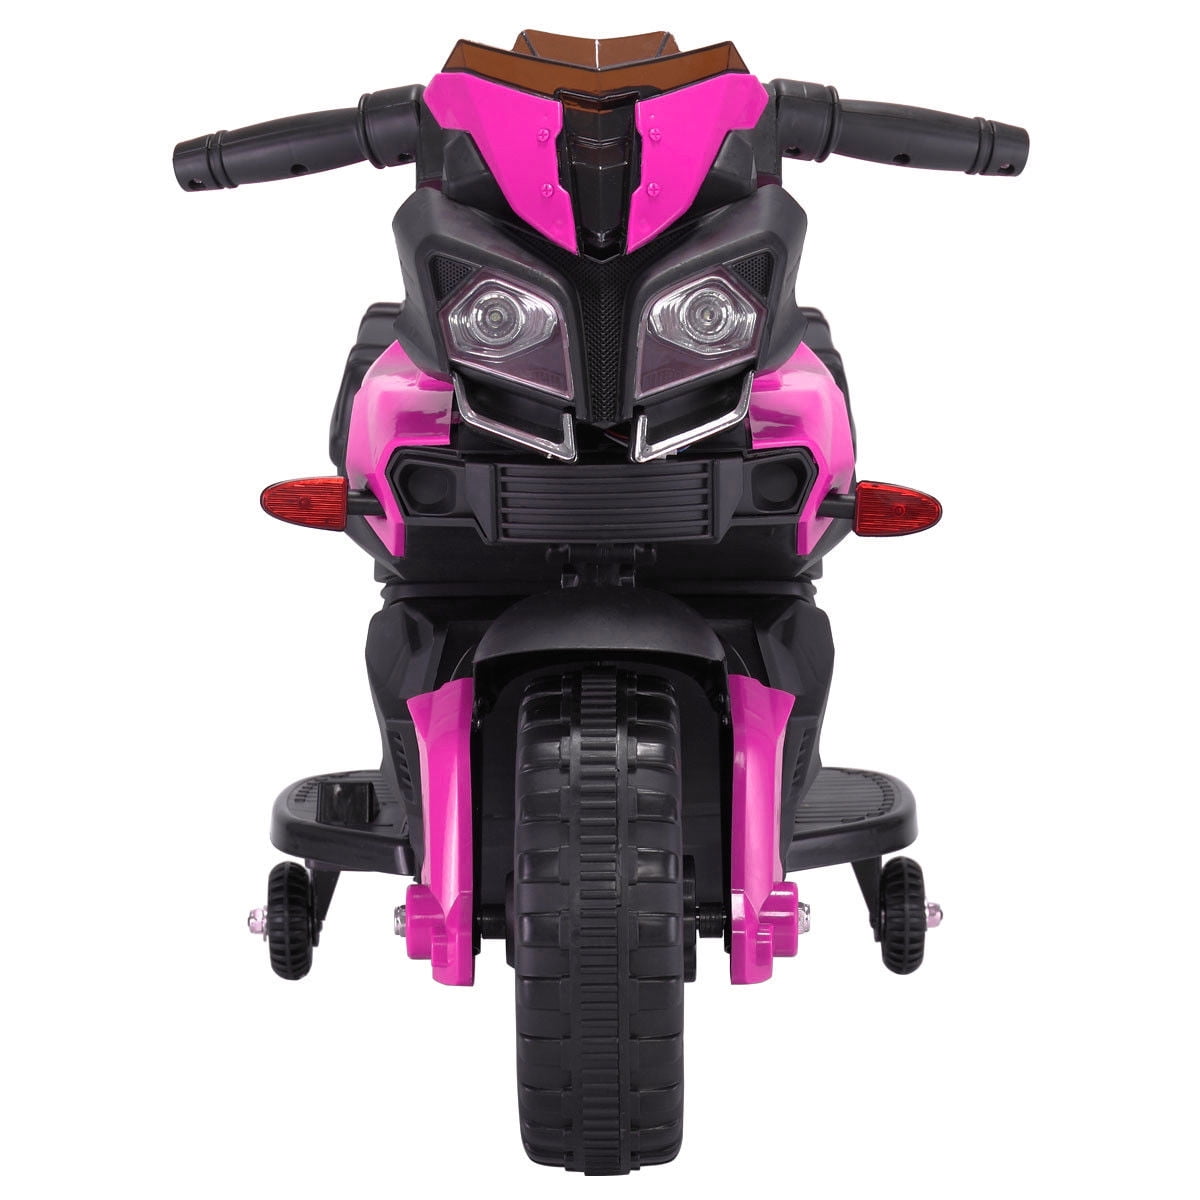 Veryke Kids Electric Battery-Powered Ride-On Motorcycle Dirt Bike Toy With 4 Wheels, Gifts for Children Girls Boys, Pink